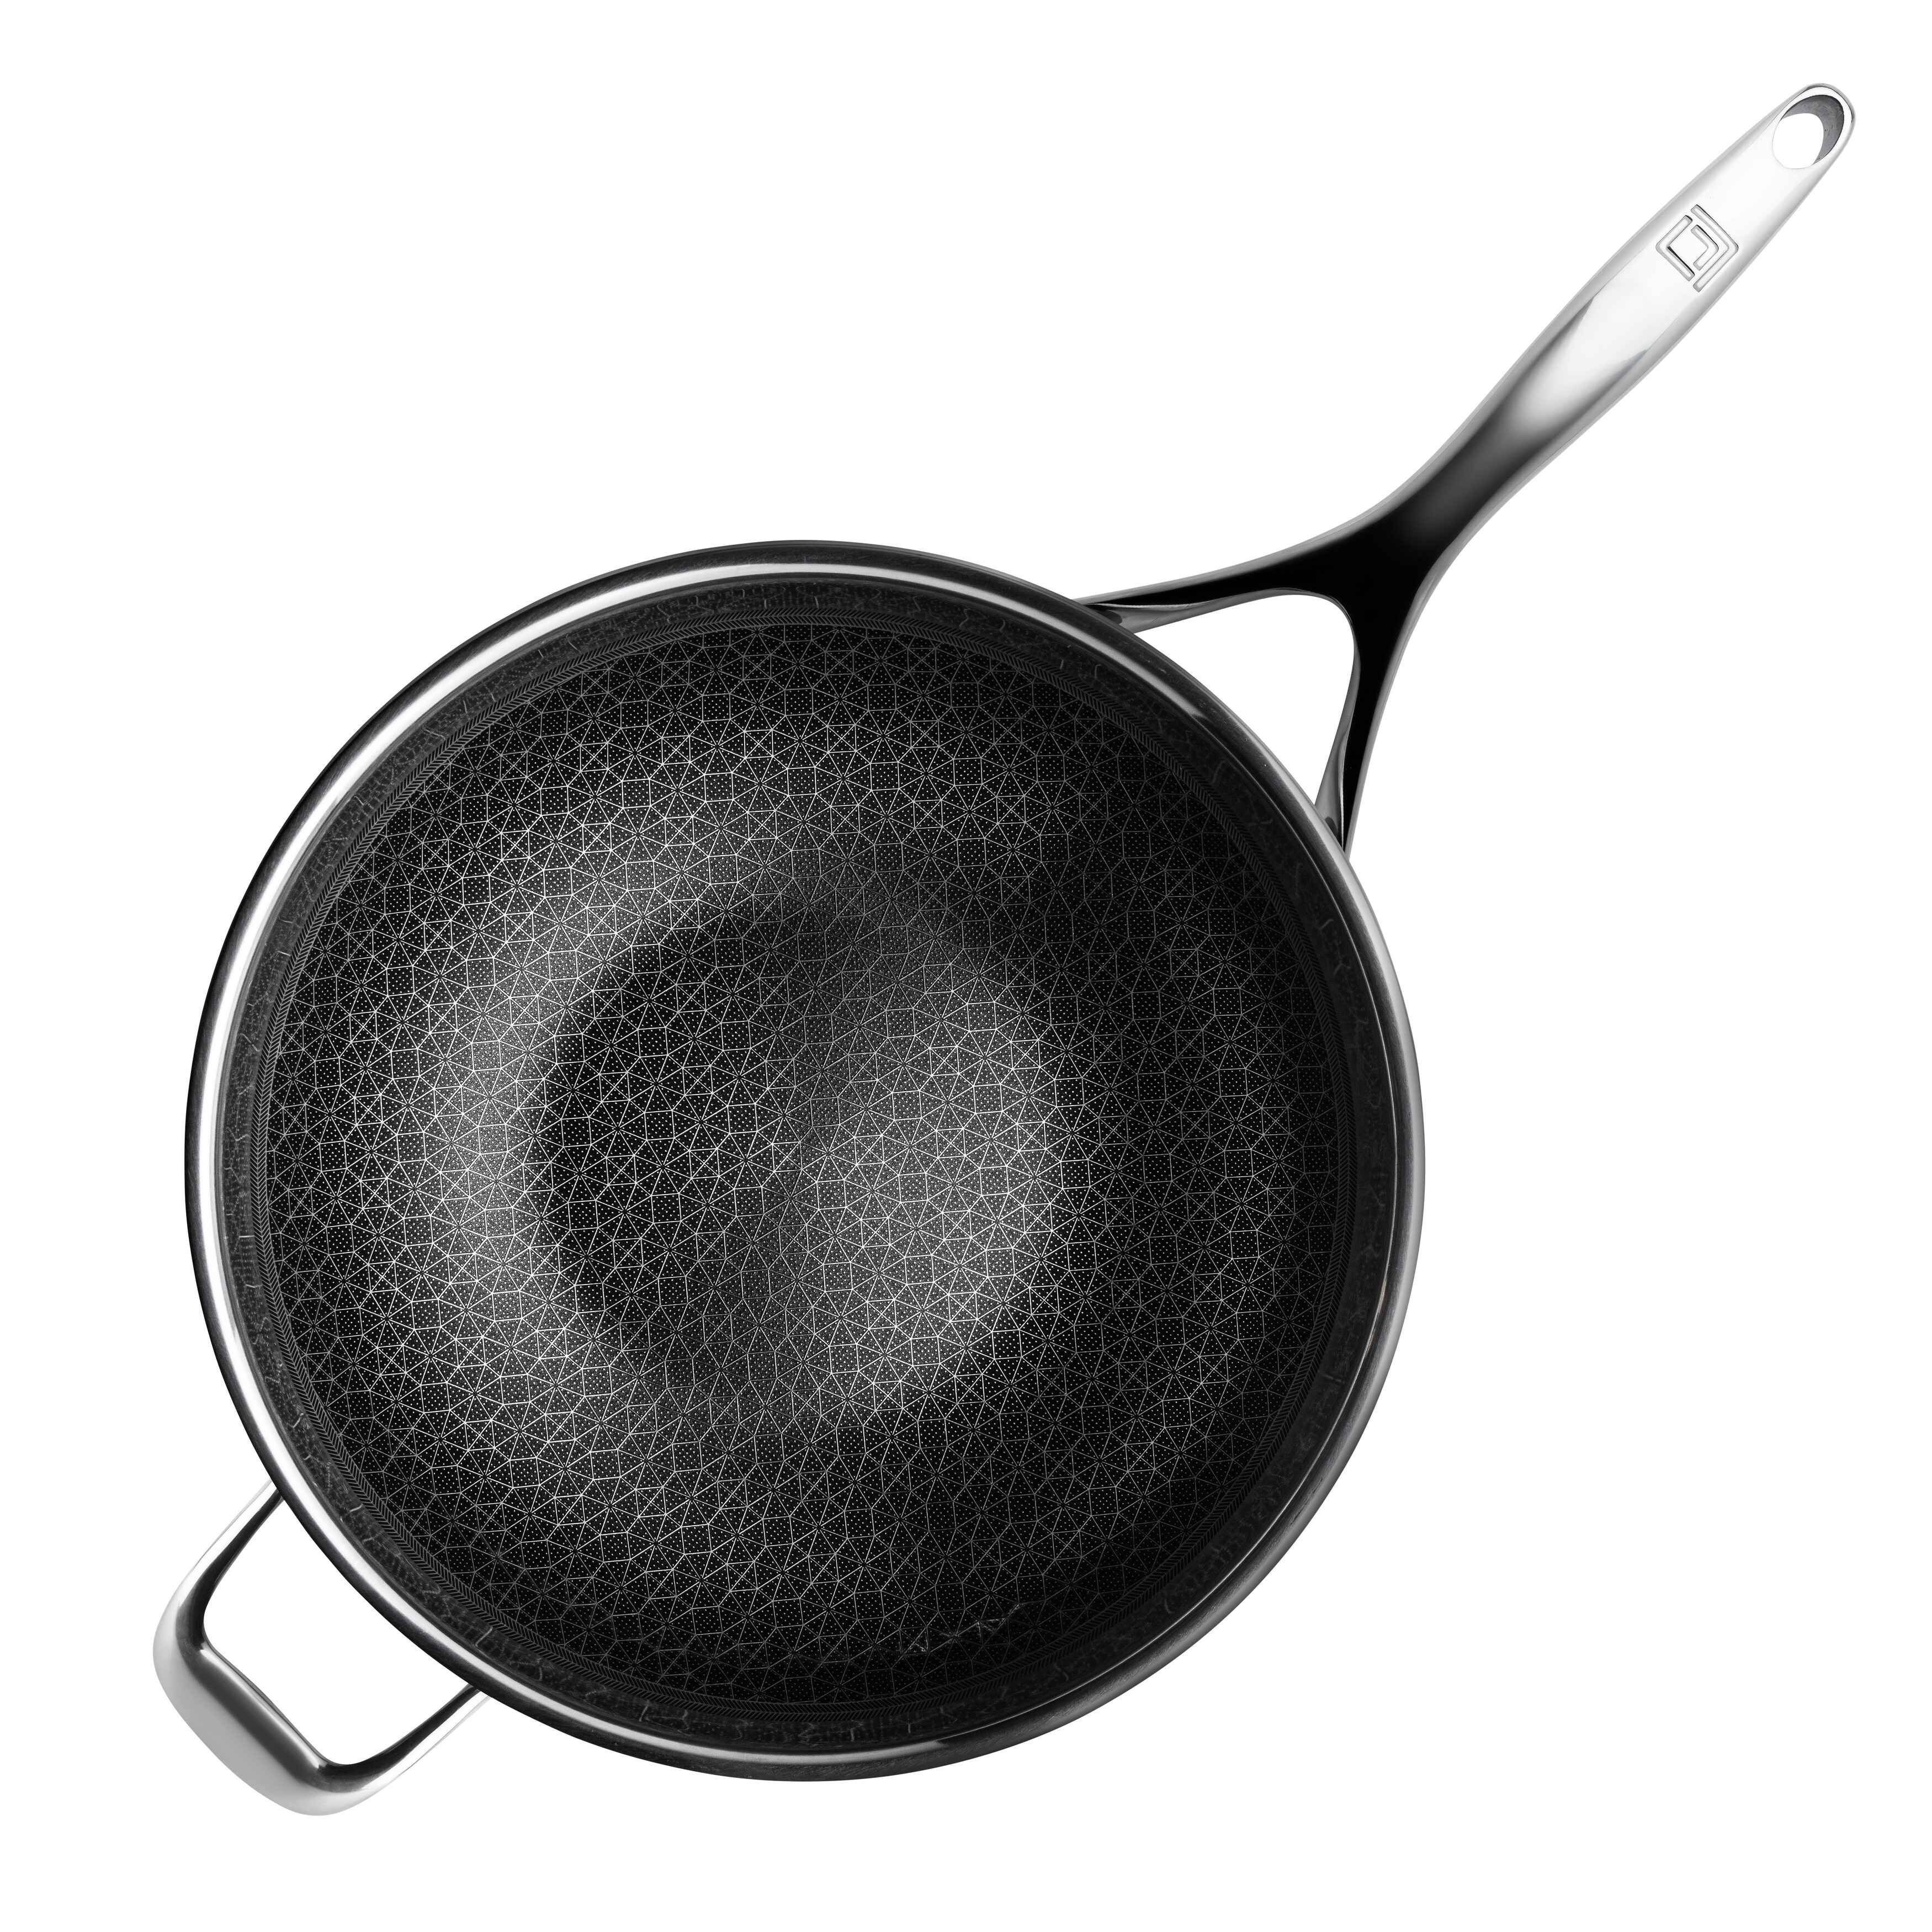 DiamondClad by Livwell 12 Hybrid Nonstick Wok Set with Tempered